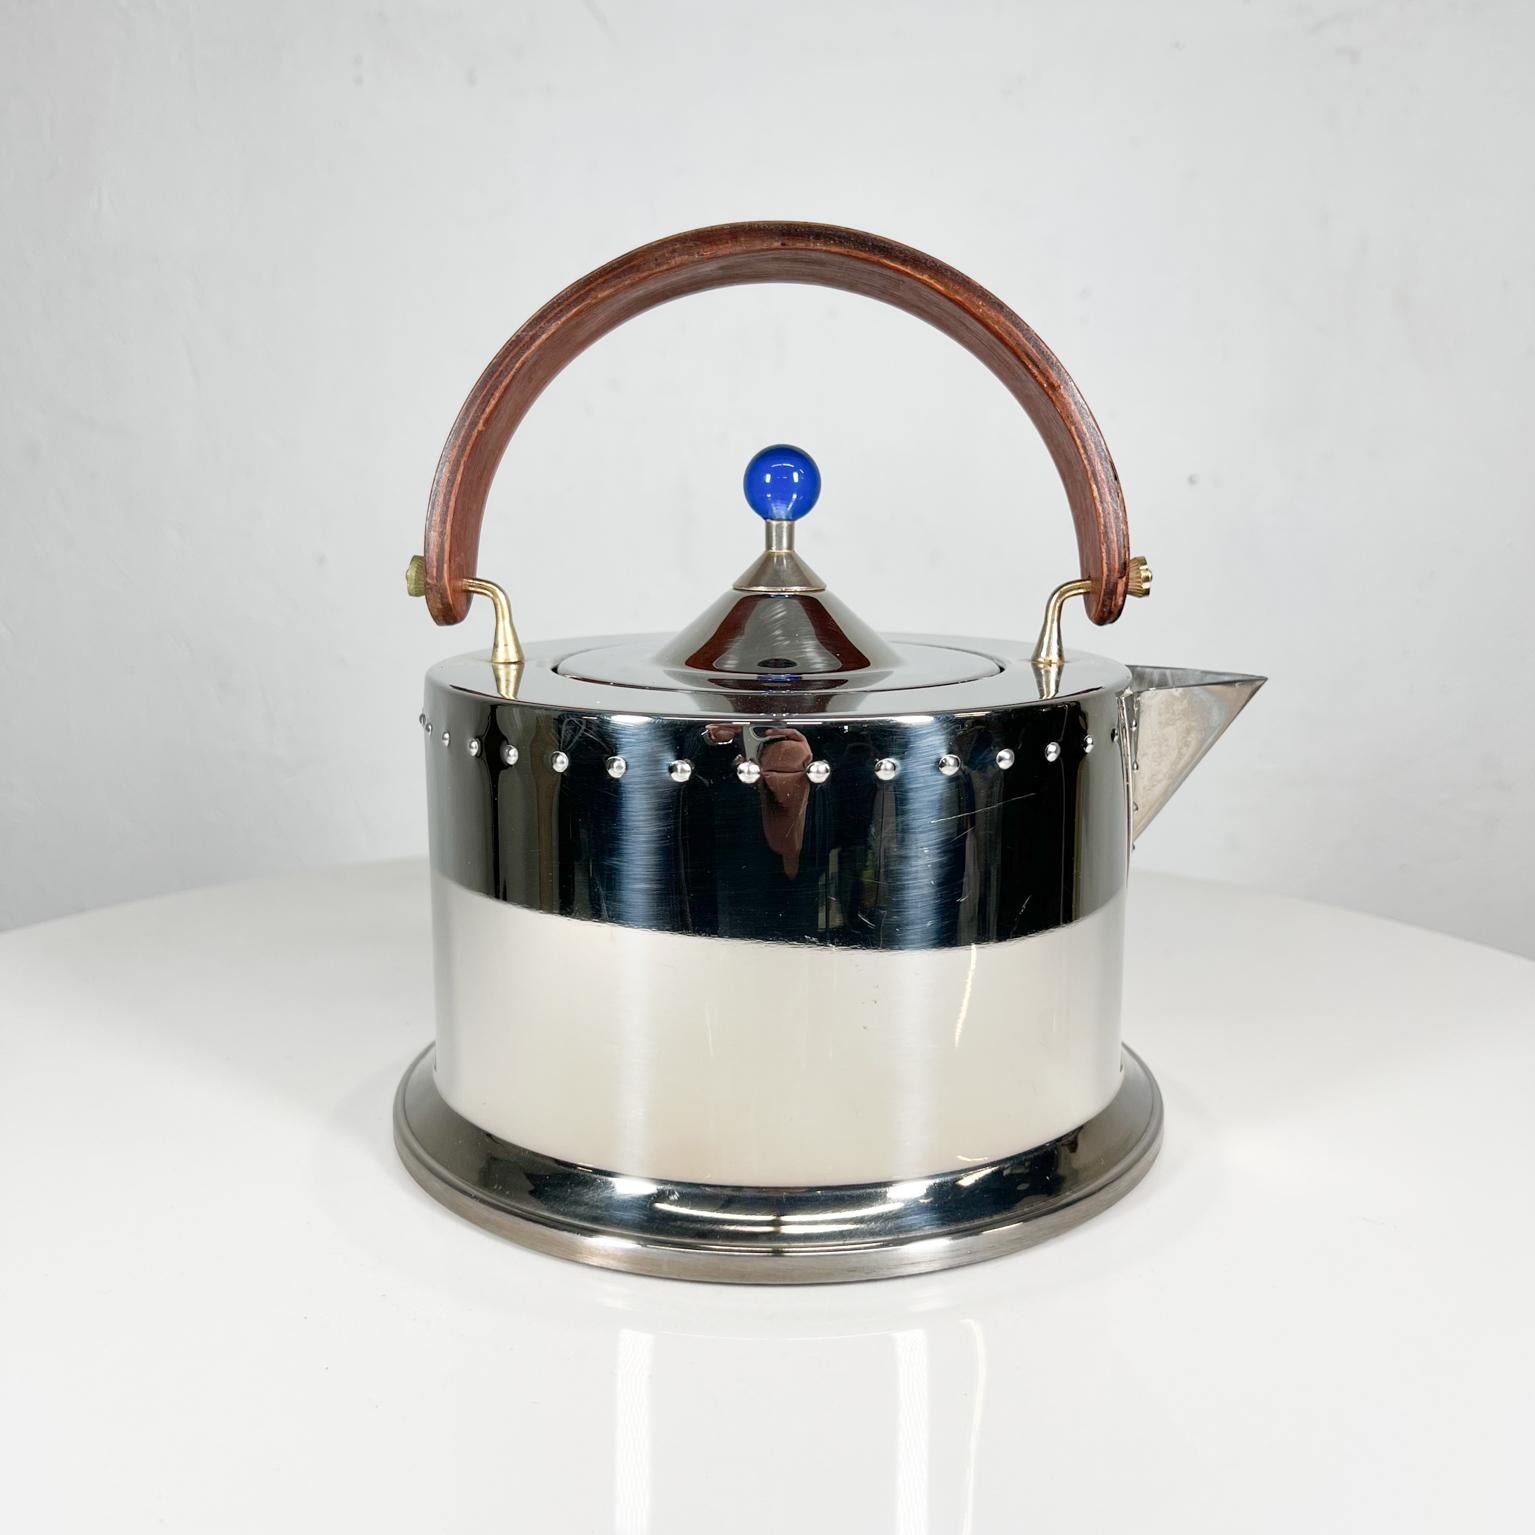 1980s Italy Postmodern Blue Ottoni tea pot kettle in Stainless Steel
For the stove top.
By Carsten Jorgensen for Bodum
Maker stamped.
Beautiful Blue Finial Bent Teakwood handle.
approximately 8.5 Tall x 7.5 diameter x 8.25 d
Preowned